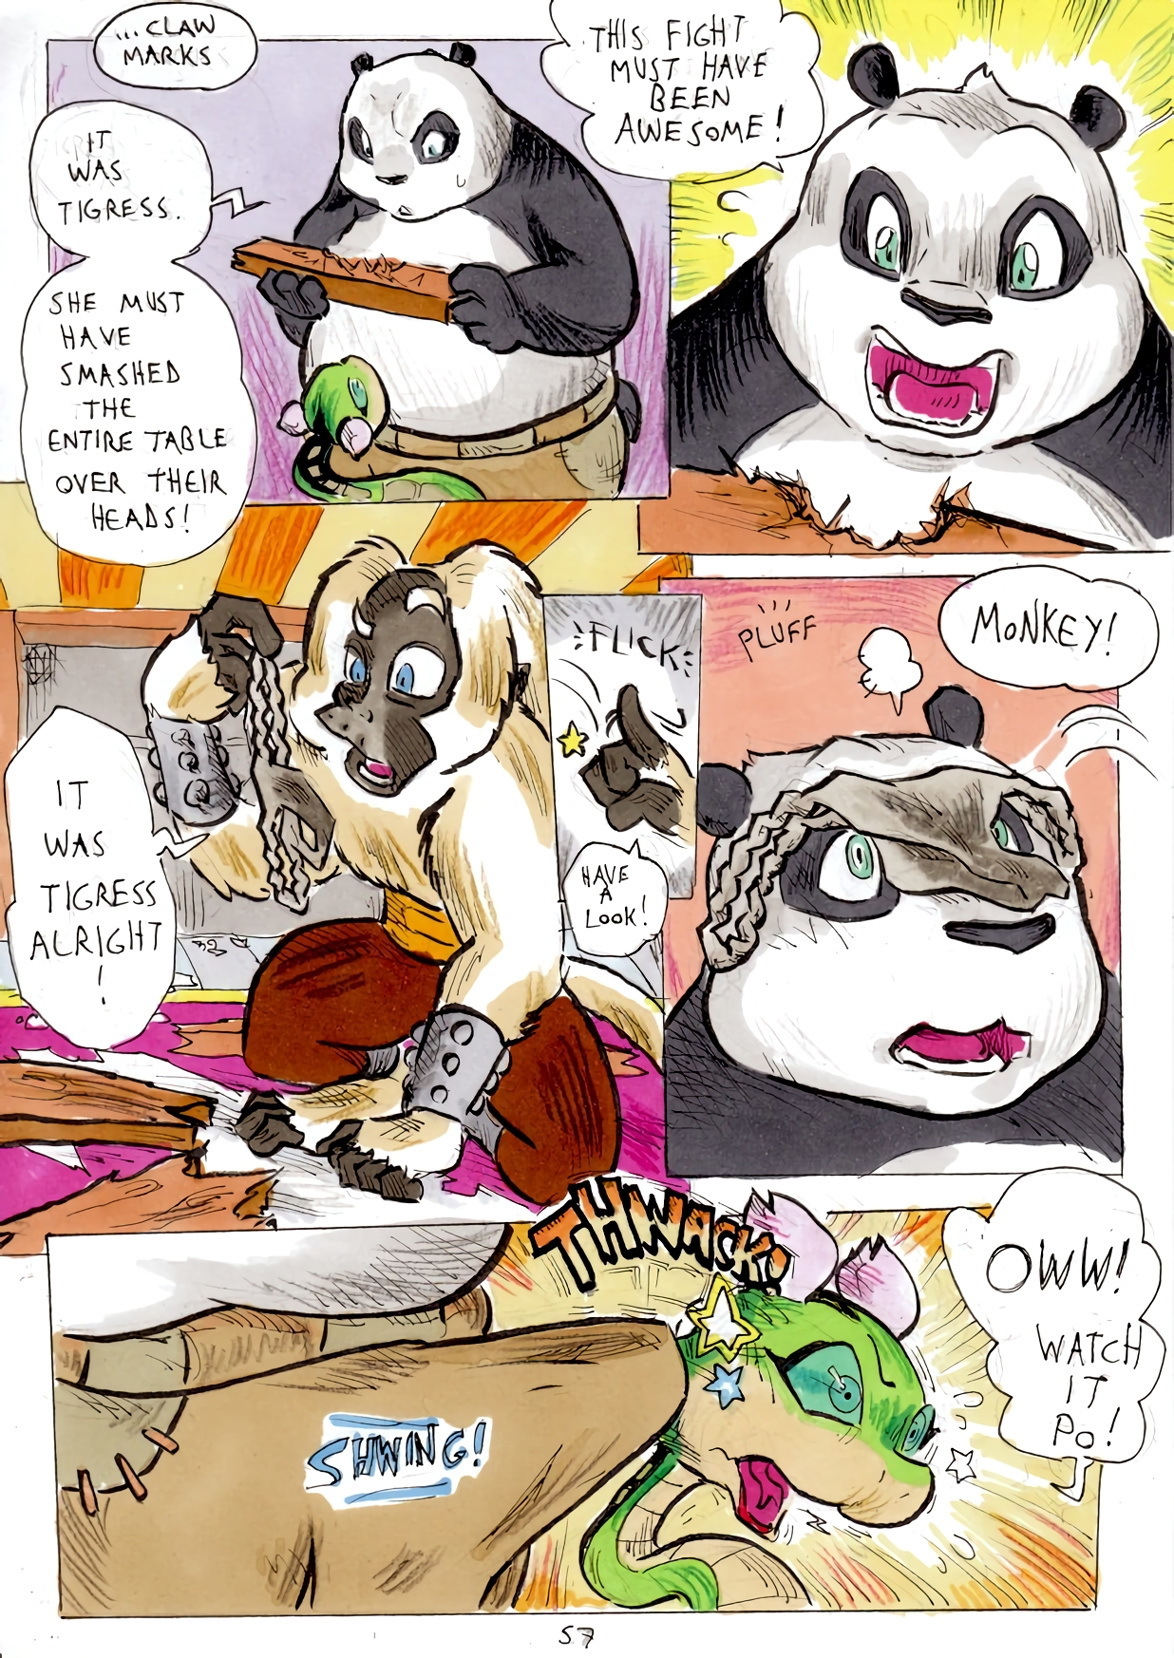 Better Late than Never 1 - Page 59